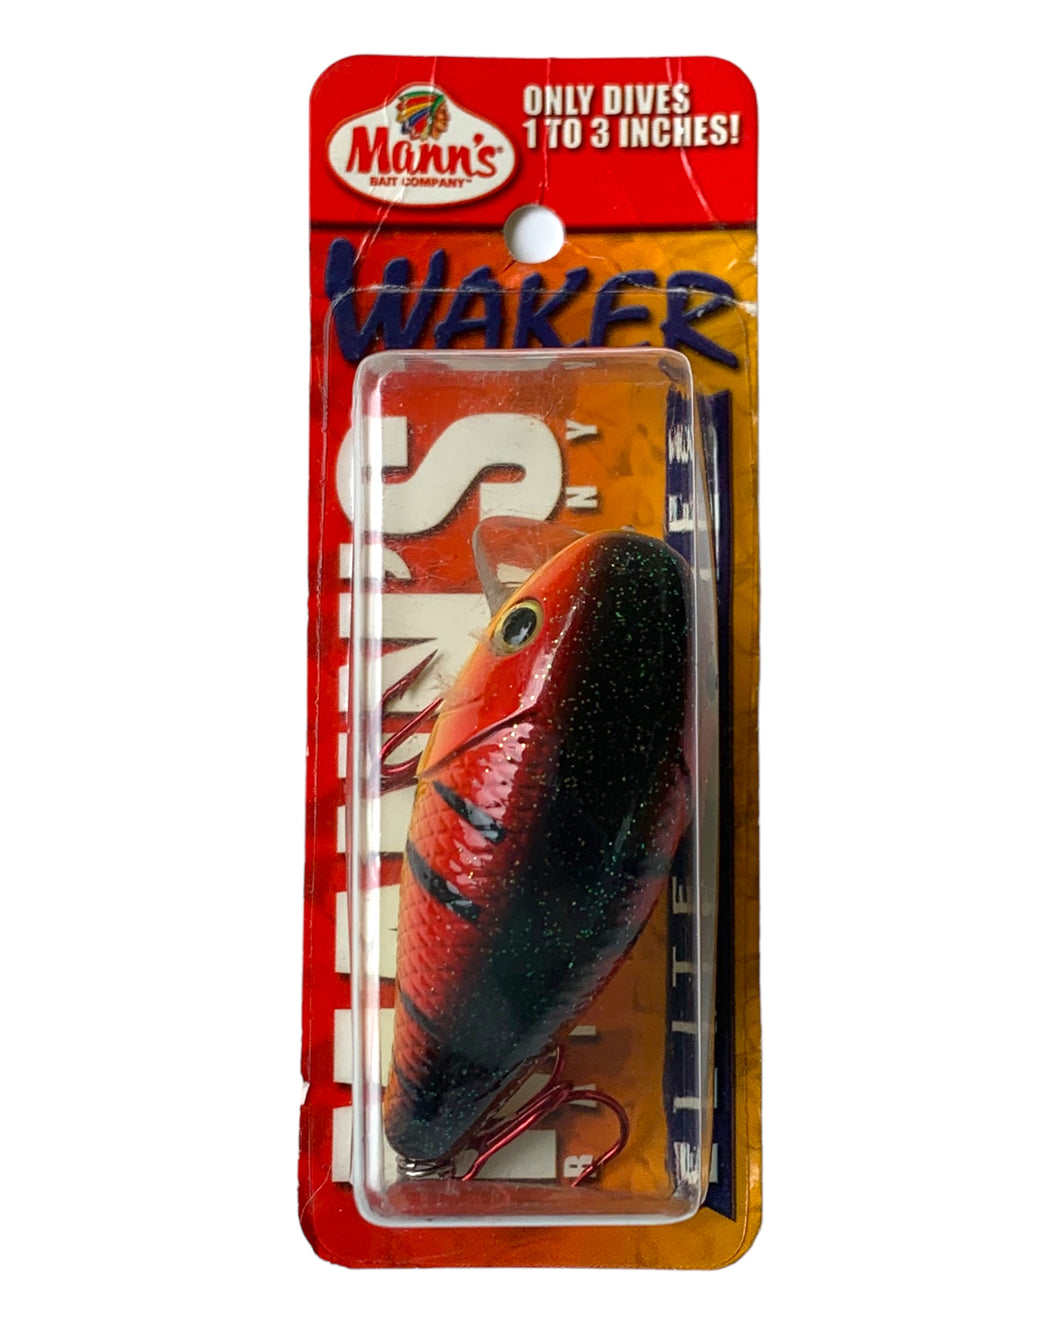 Front Package View of MANN'S BAIT COMPANY 3/8 oz WAKER ELITE Fishing Lure in TEXAS SUNRISE. For Sale at Toad Tackle.